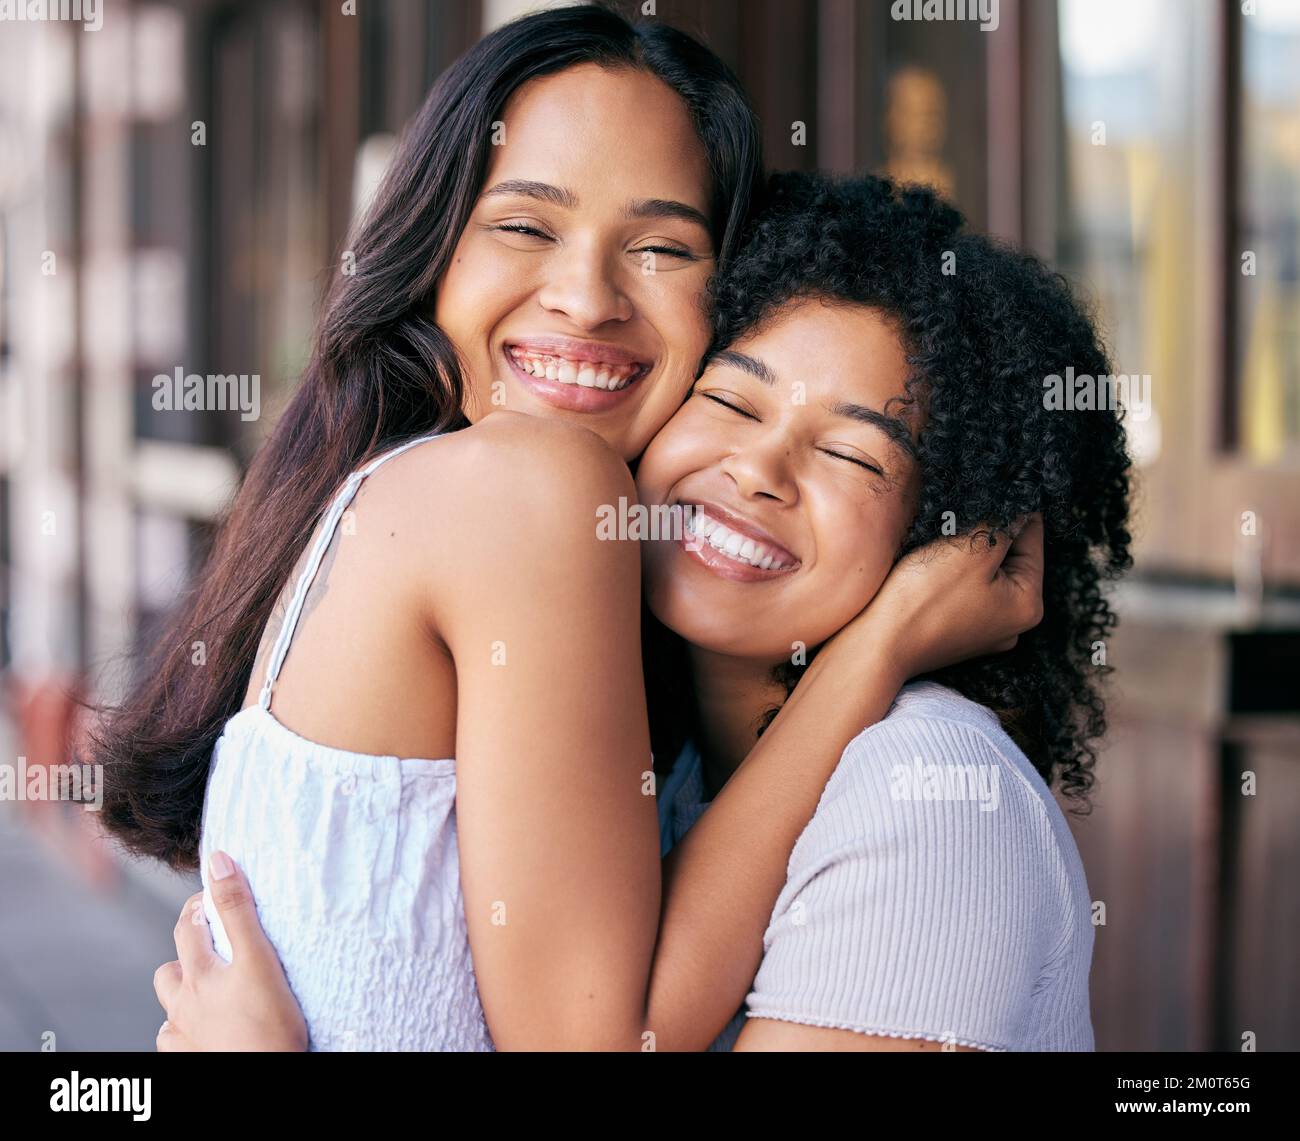 Friends, love and care with hug while bonding outside in the city during a summer trip. Bond, loving and caring friendship with cheerful women embrace Stock Photo